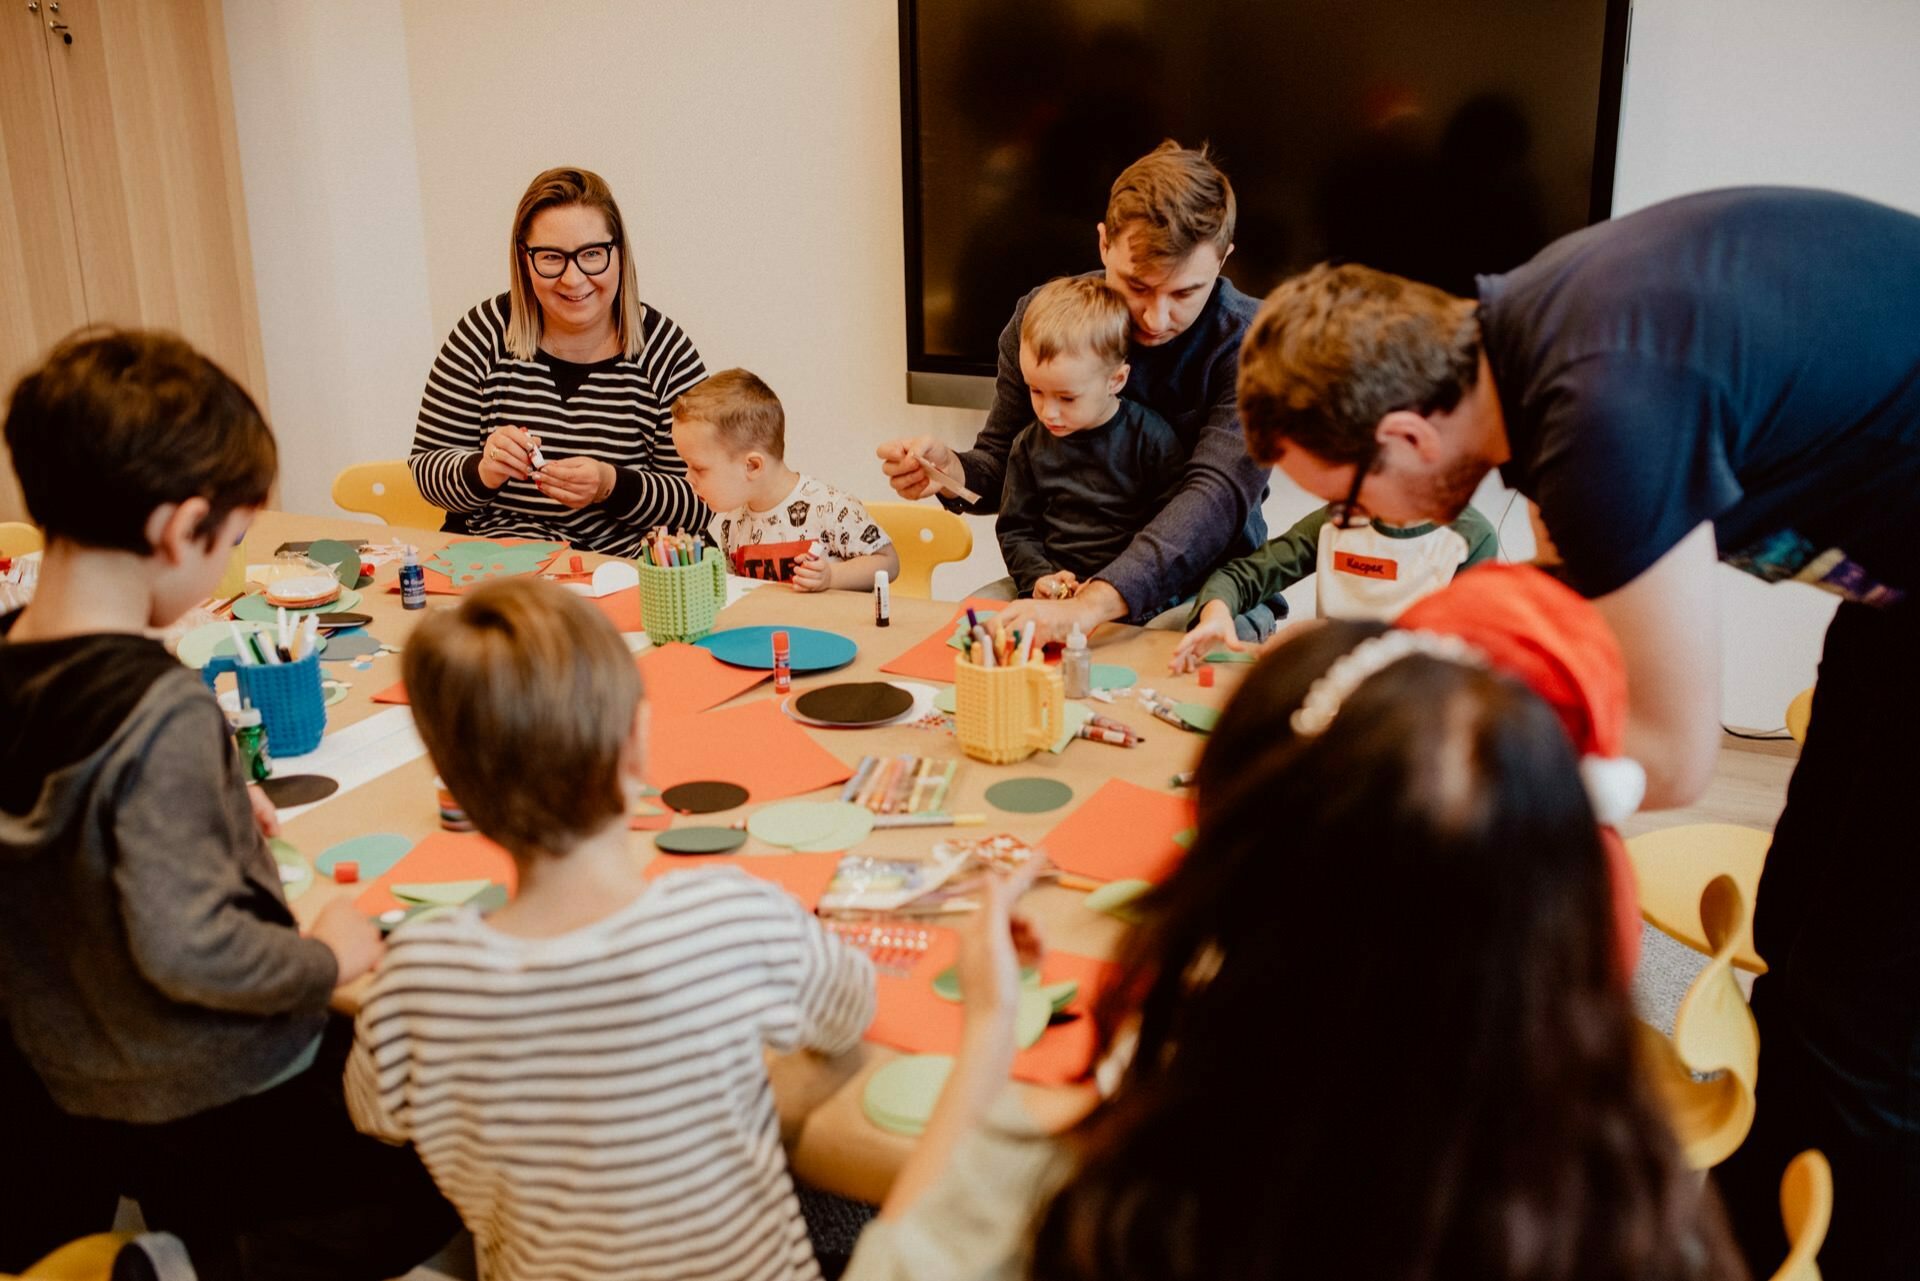 Children cut out Christmas decorations with their parents